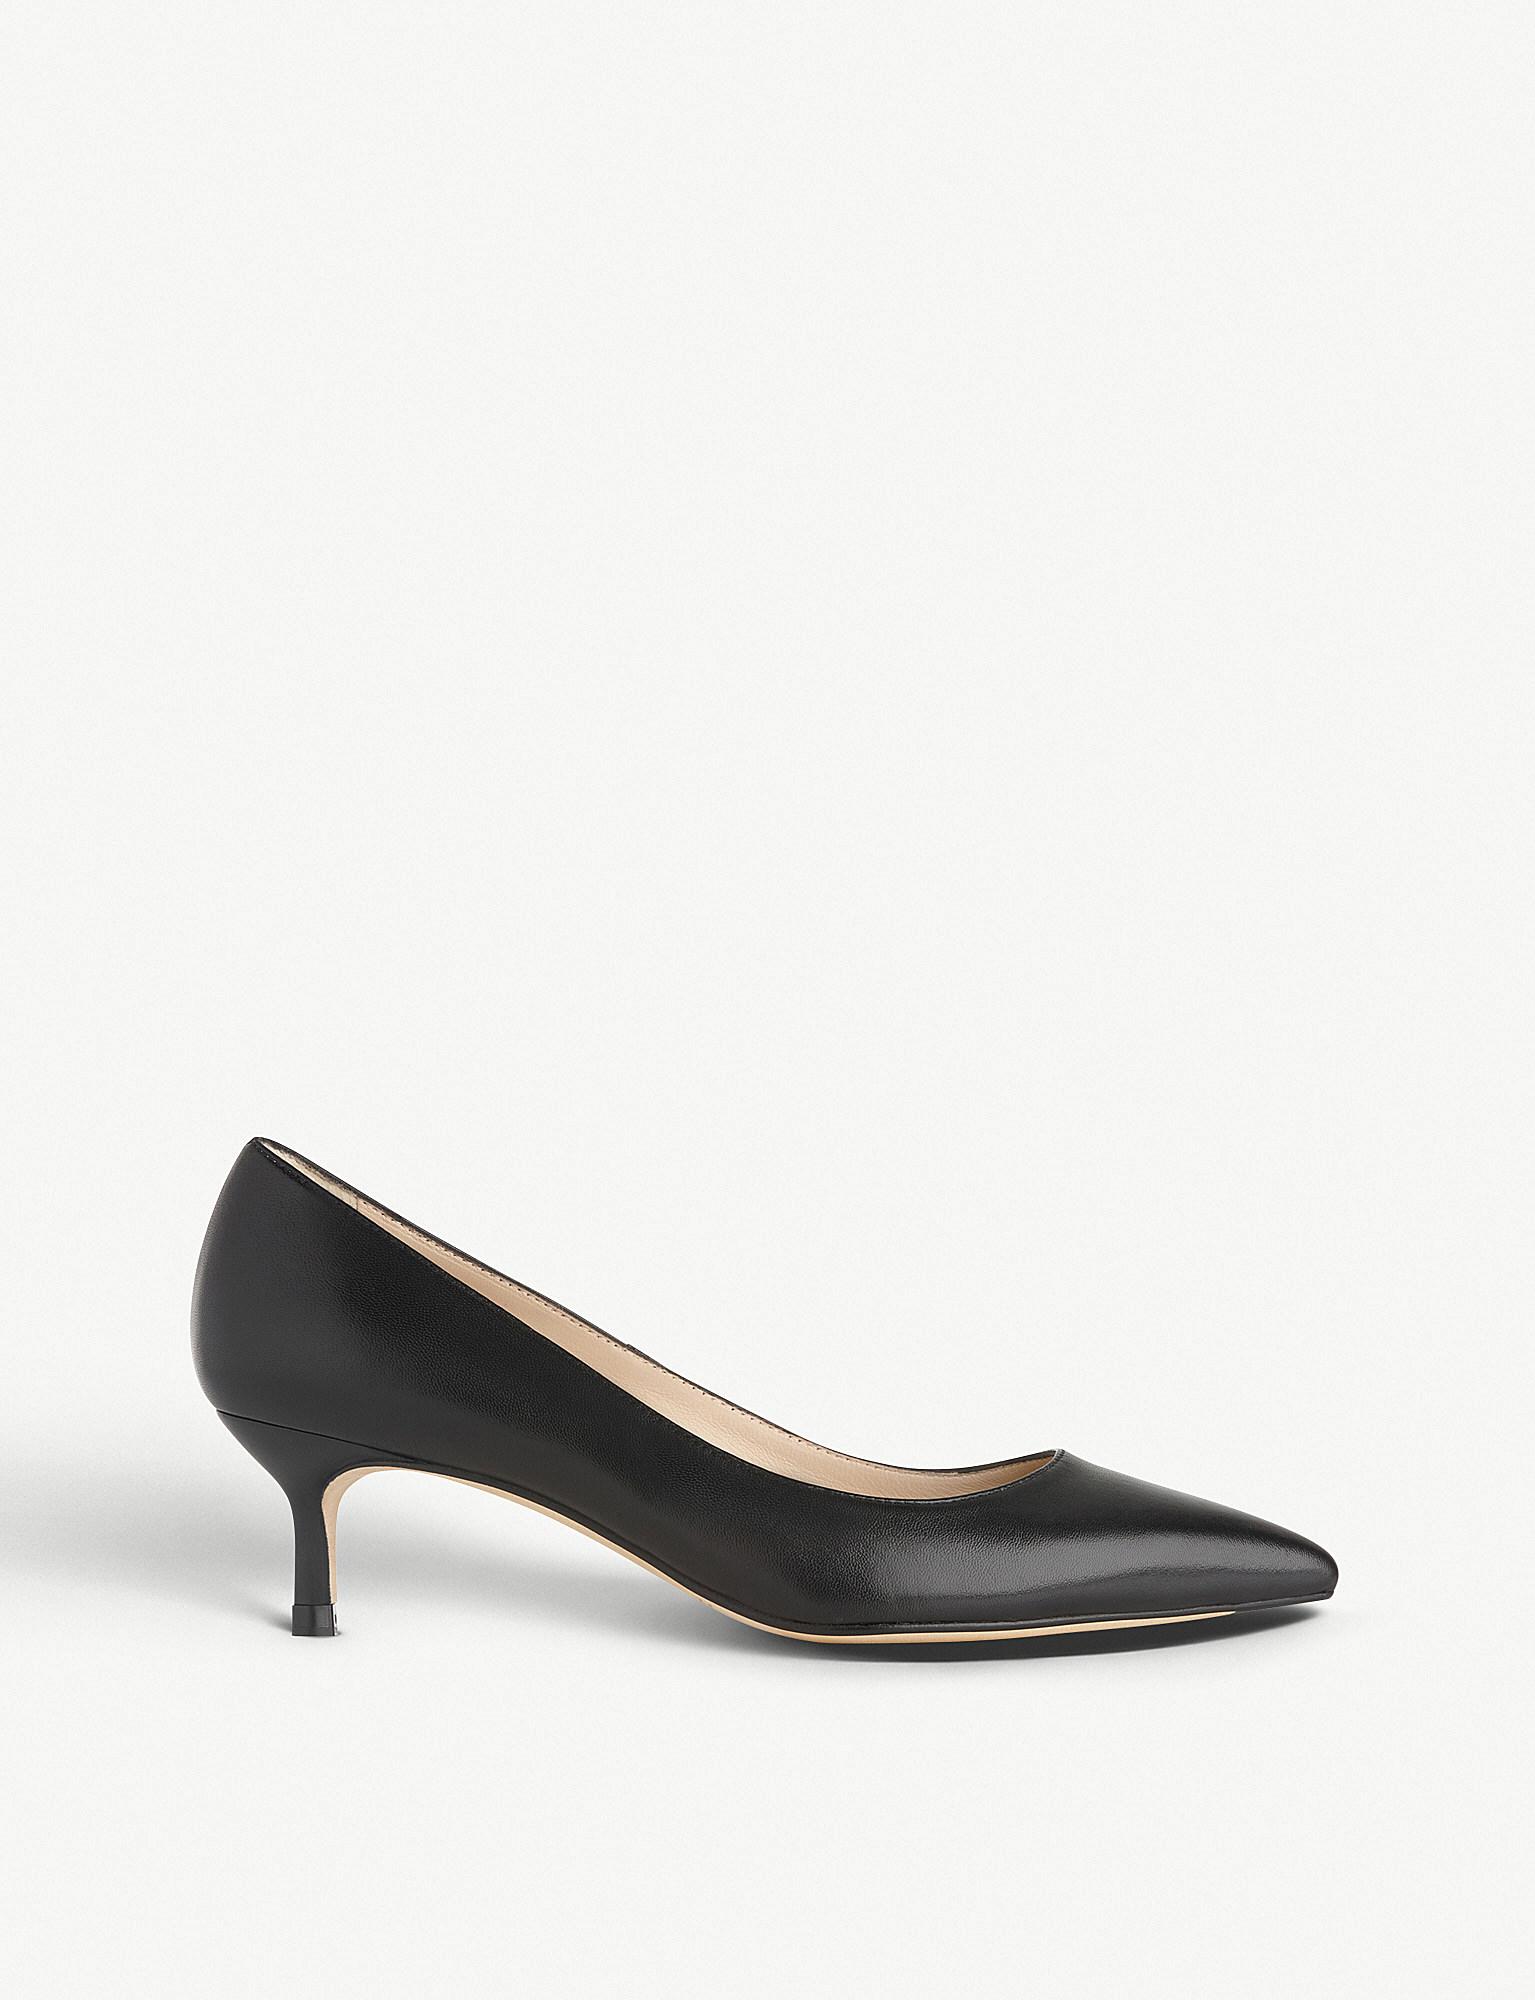 Lyst - L.K.Bennett Audrey Leather Courts in Black